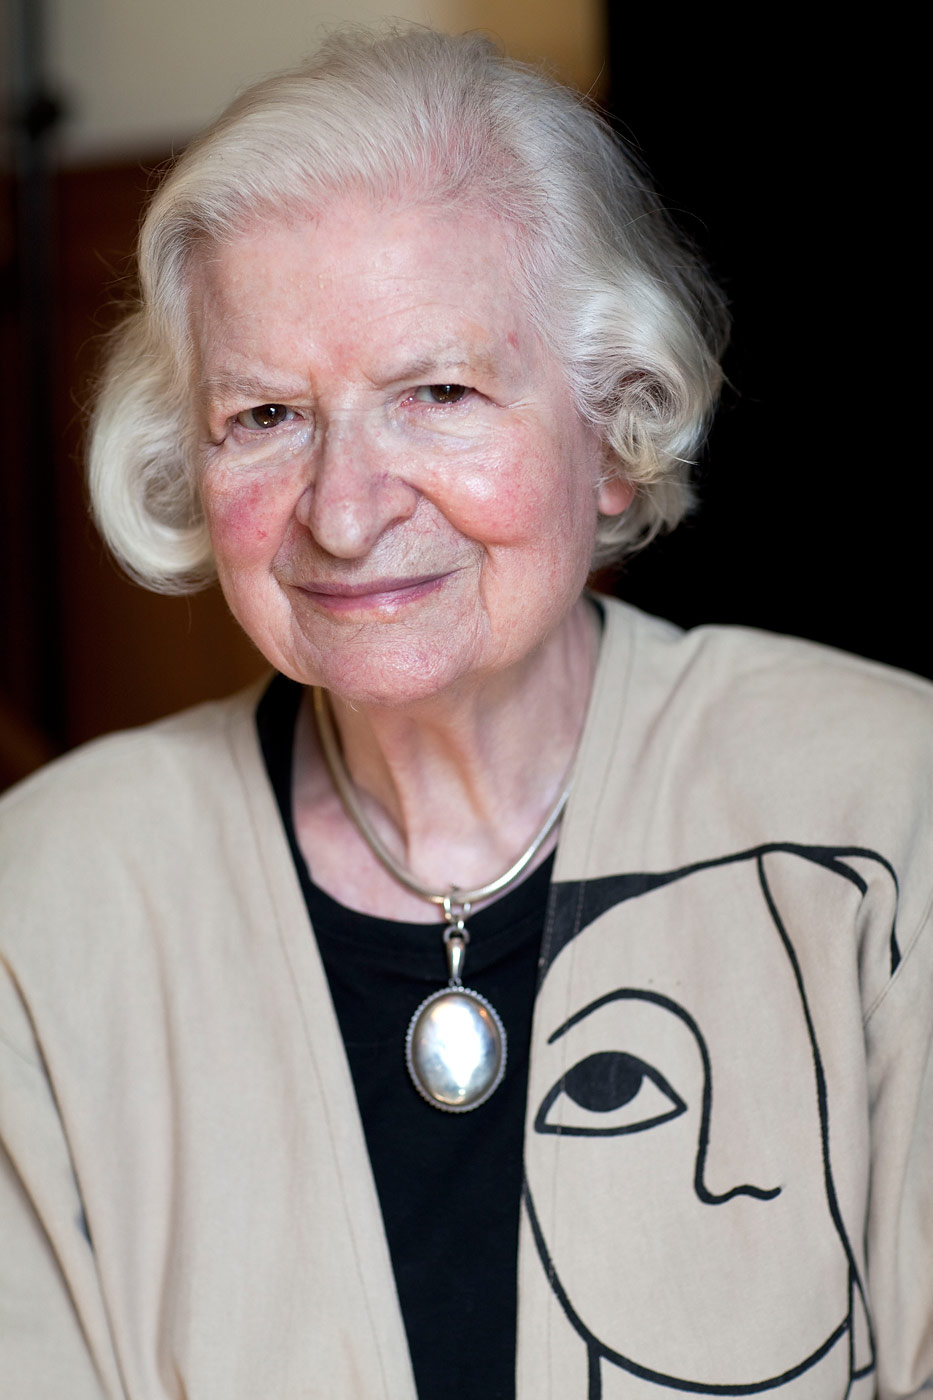 Author P.D. James poses for a portrait at the Oxford Literary Festival on April 9, 2011 in Oxford, England. (David Levenson—Getty Images)